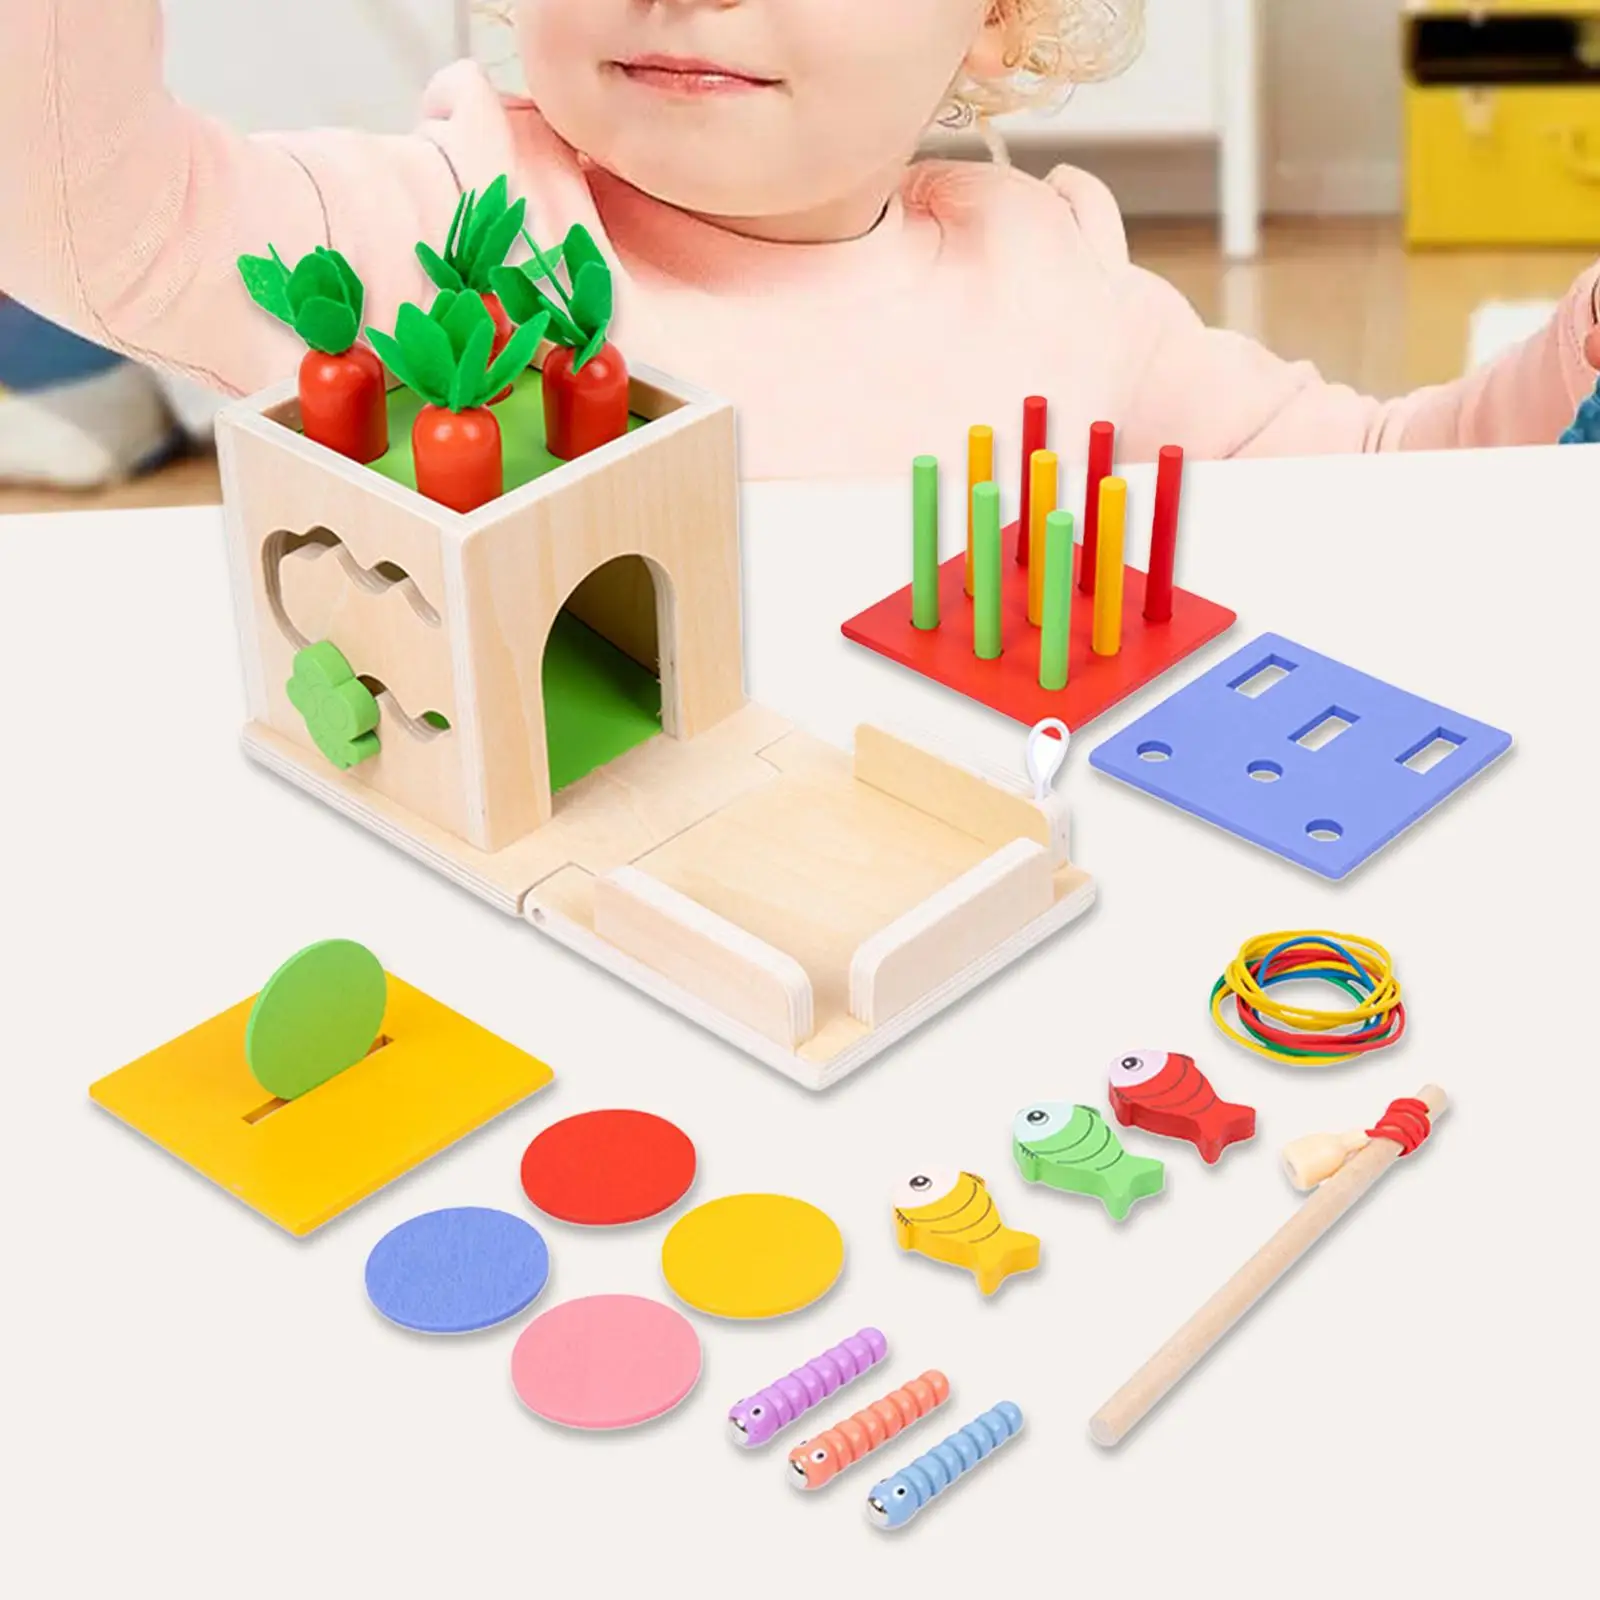 Montessori Toddler Play Kit Gear Toddler Educational Learning Toys Stacking Object Permanence Box for 1 2 3 Year Old 6 Months up